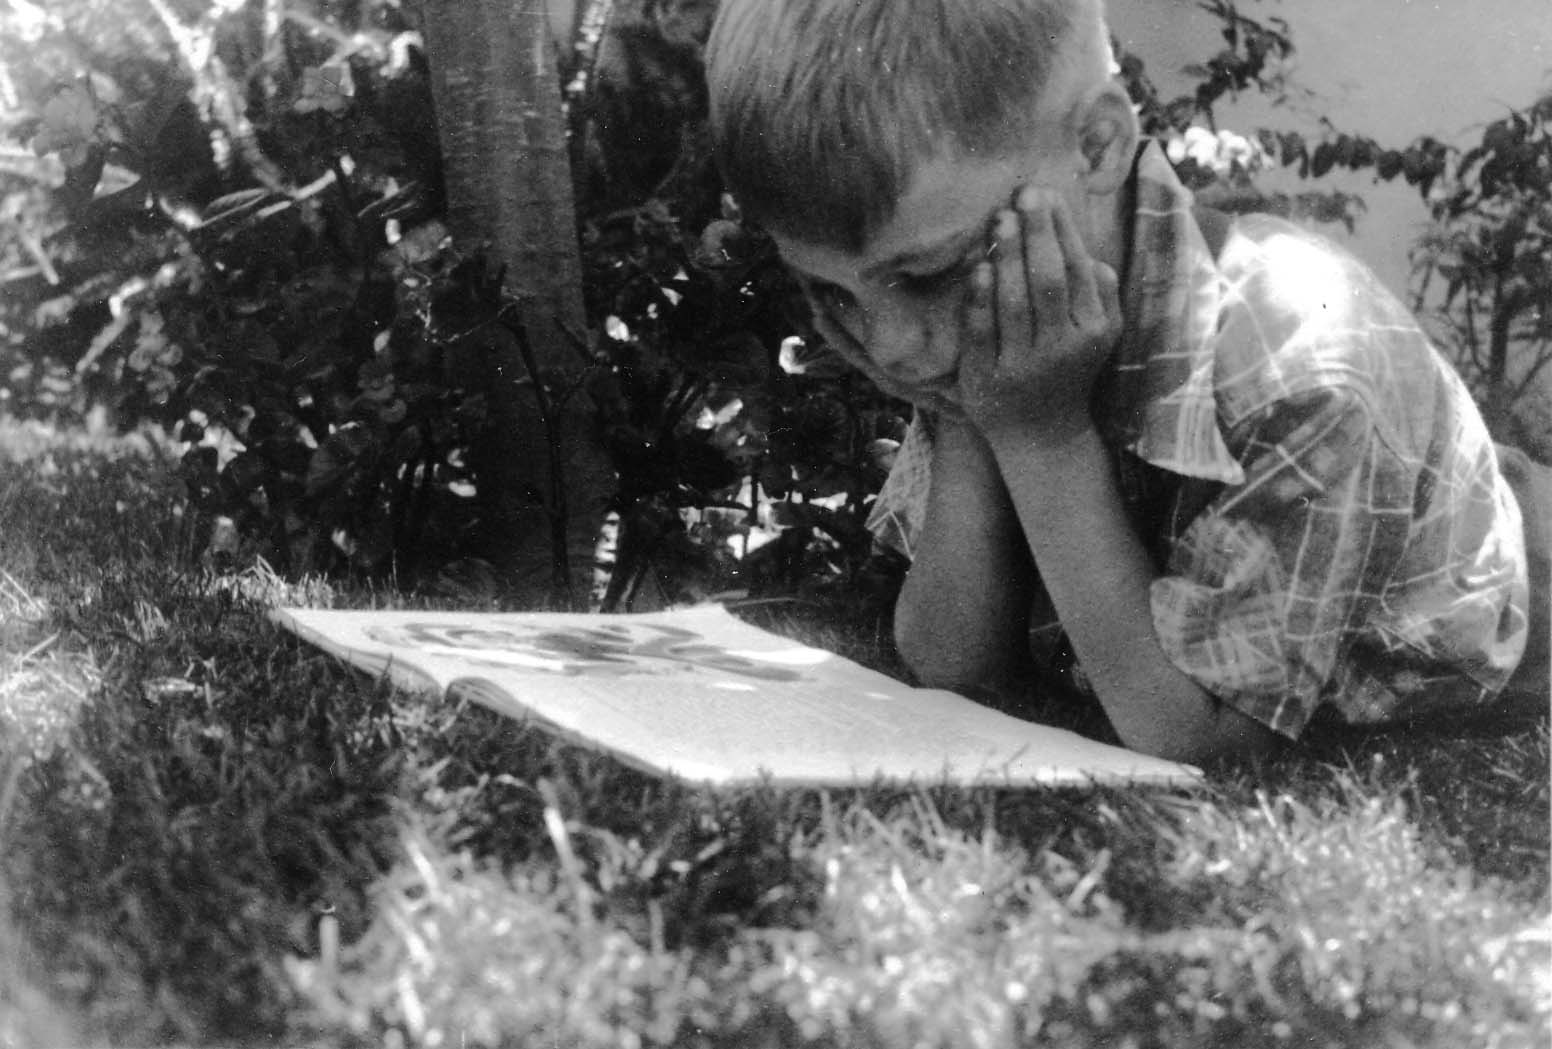 Vintage black and white photo of Don Hall, Jr reading  book at the Hall home in Point Loma, San Diego, California. Photo taken by Donald Hall, engineer of the Spirit of St. Louis